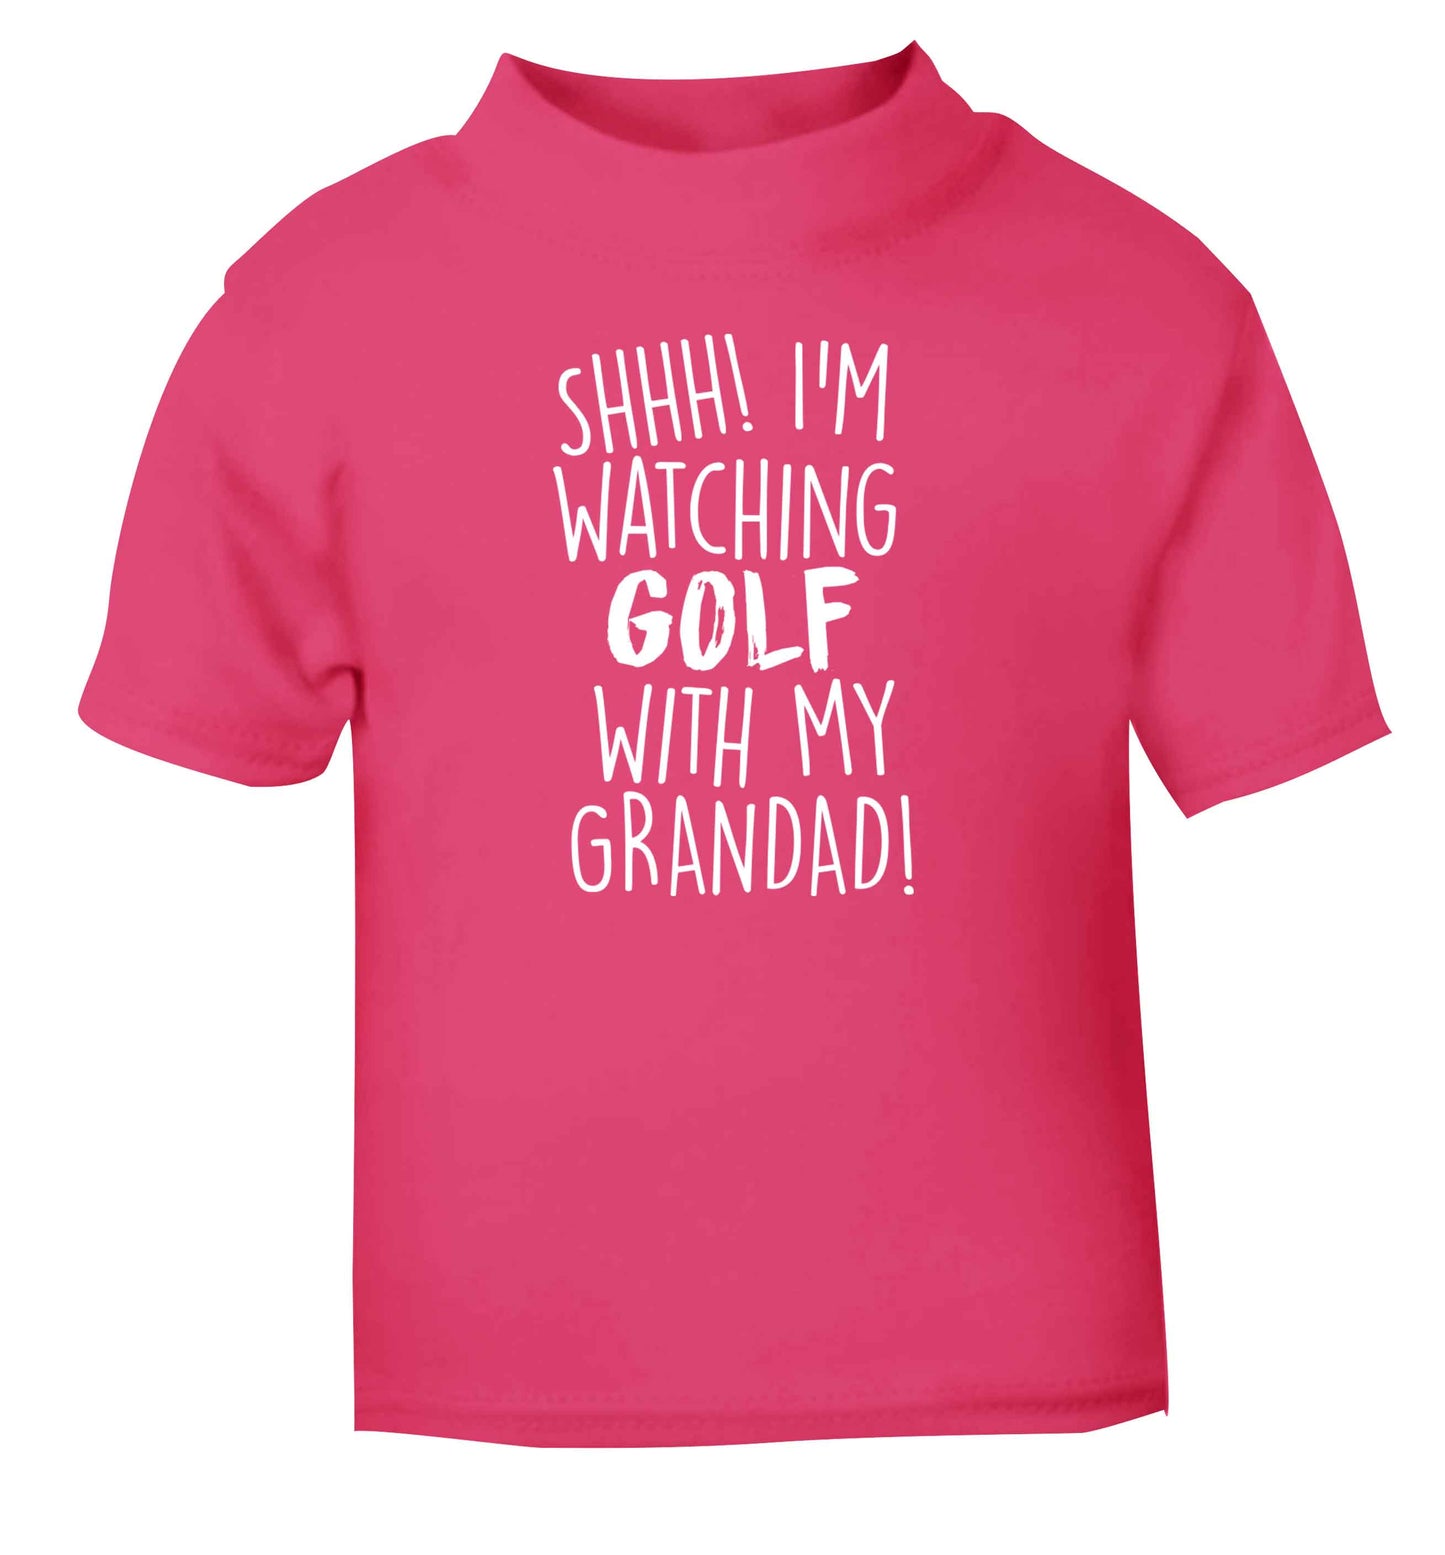 Shh I'm watching golf with my grandad pink Baby Toddler Tshirt 2 Years